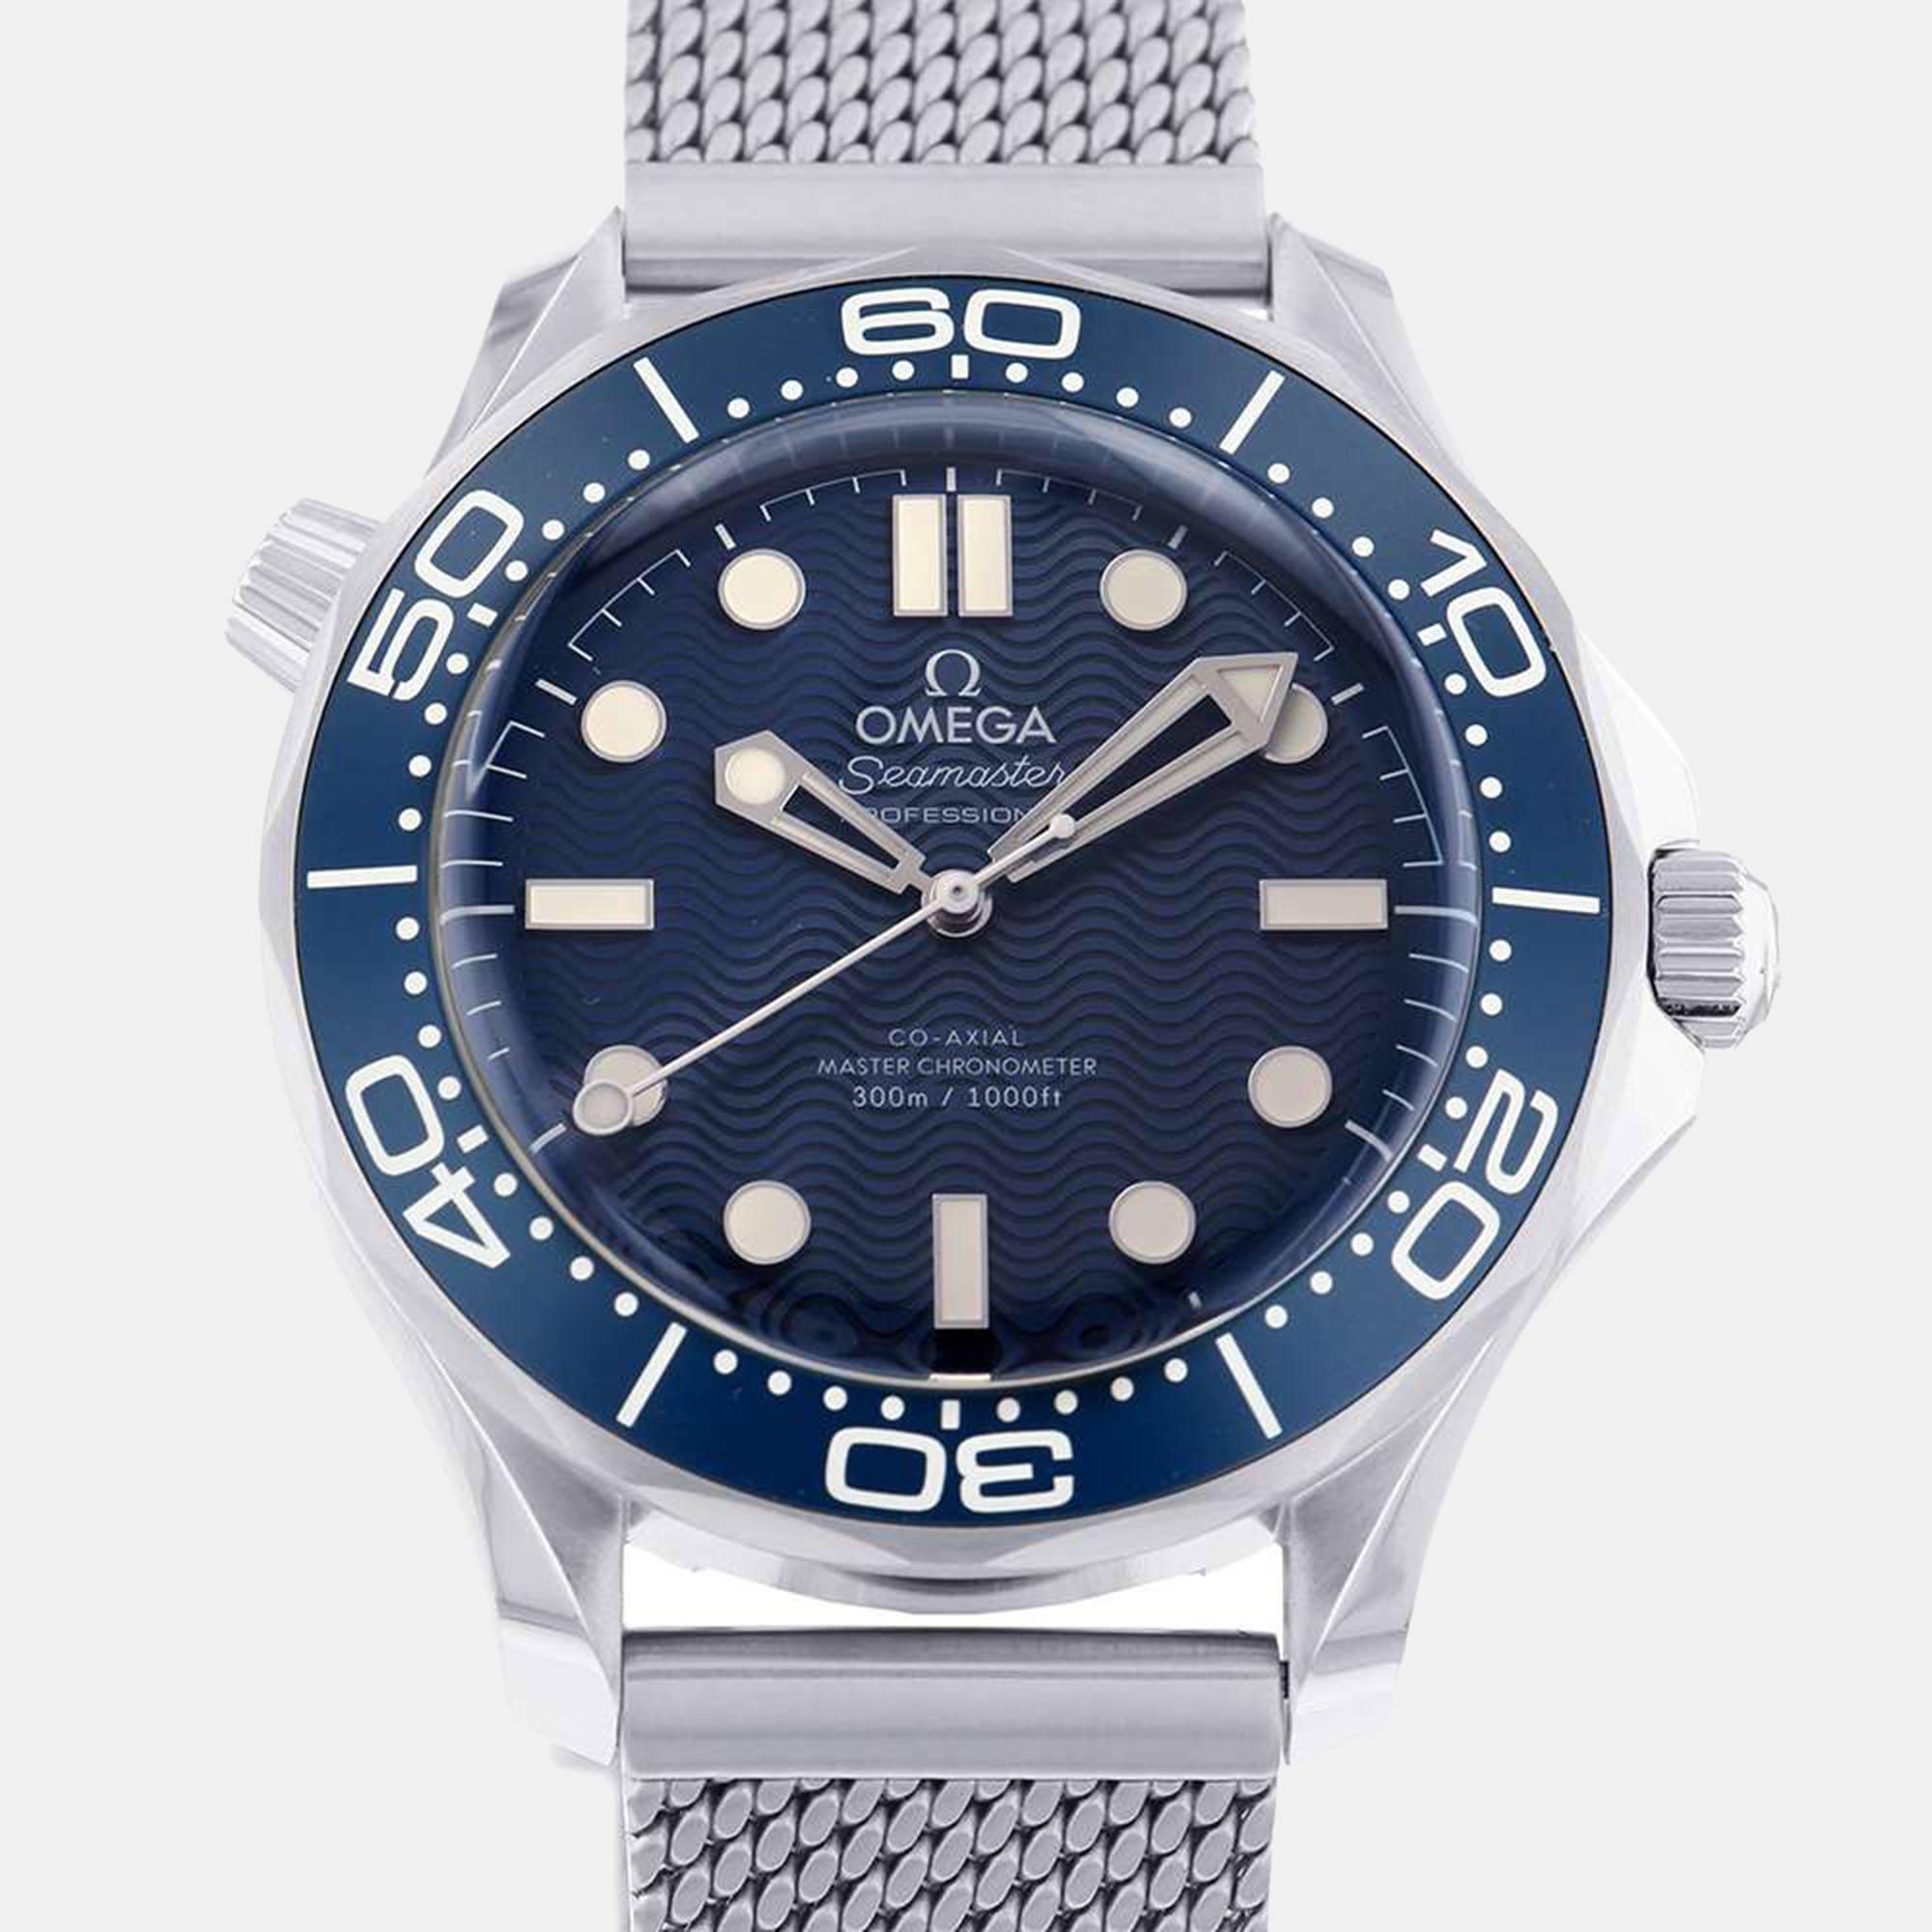 Omega blue stainless steel seamaster 210.30.42.20.03.002 automatic men's wristwatch 42 mm